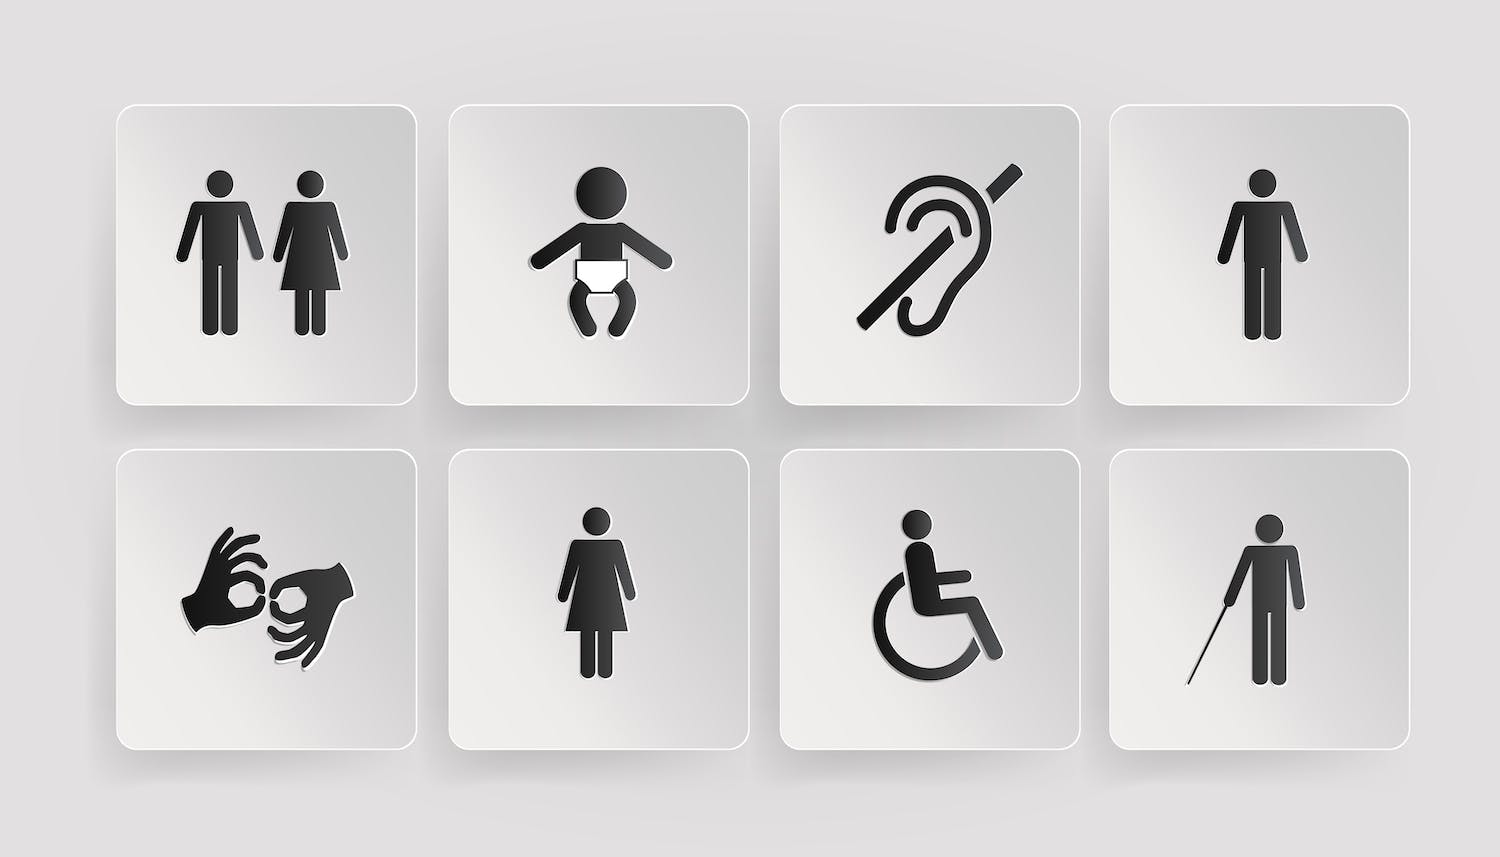 Pictograms of of disabled, toilets, baby and mother room